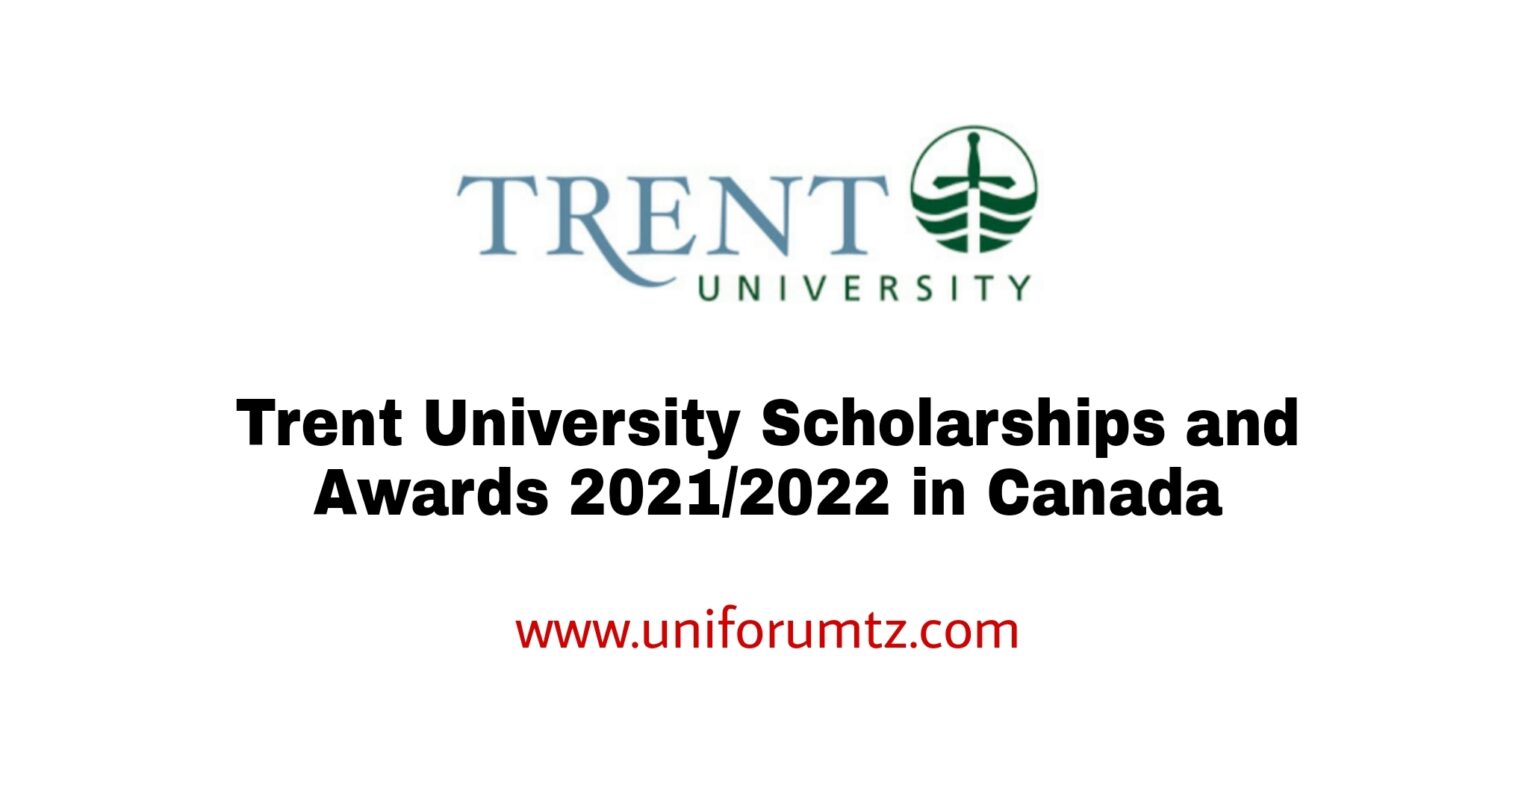 Trent University Scholarships and Awards 2021/2022 in Canada